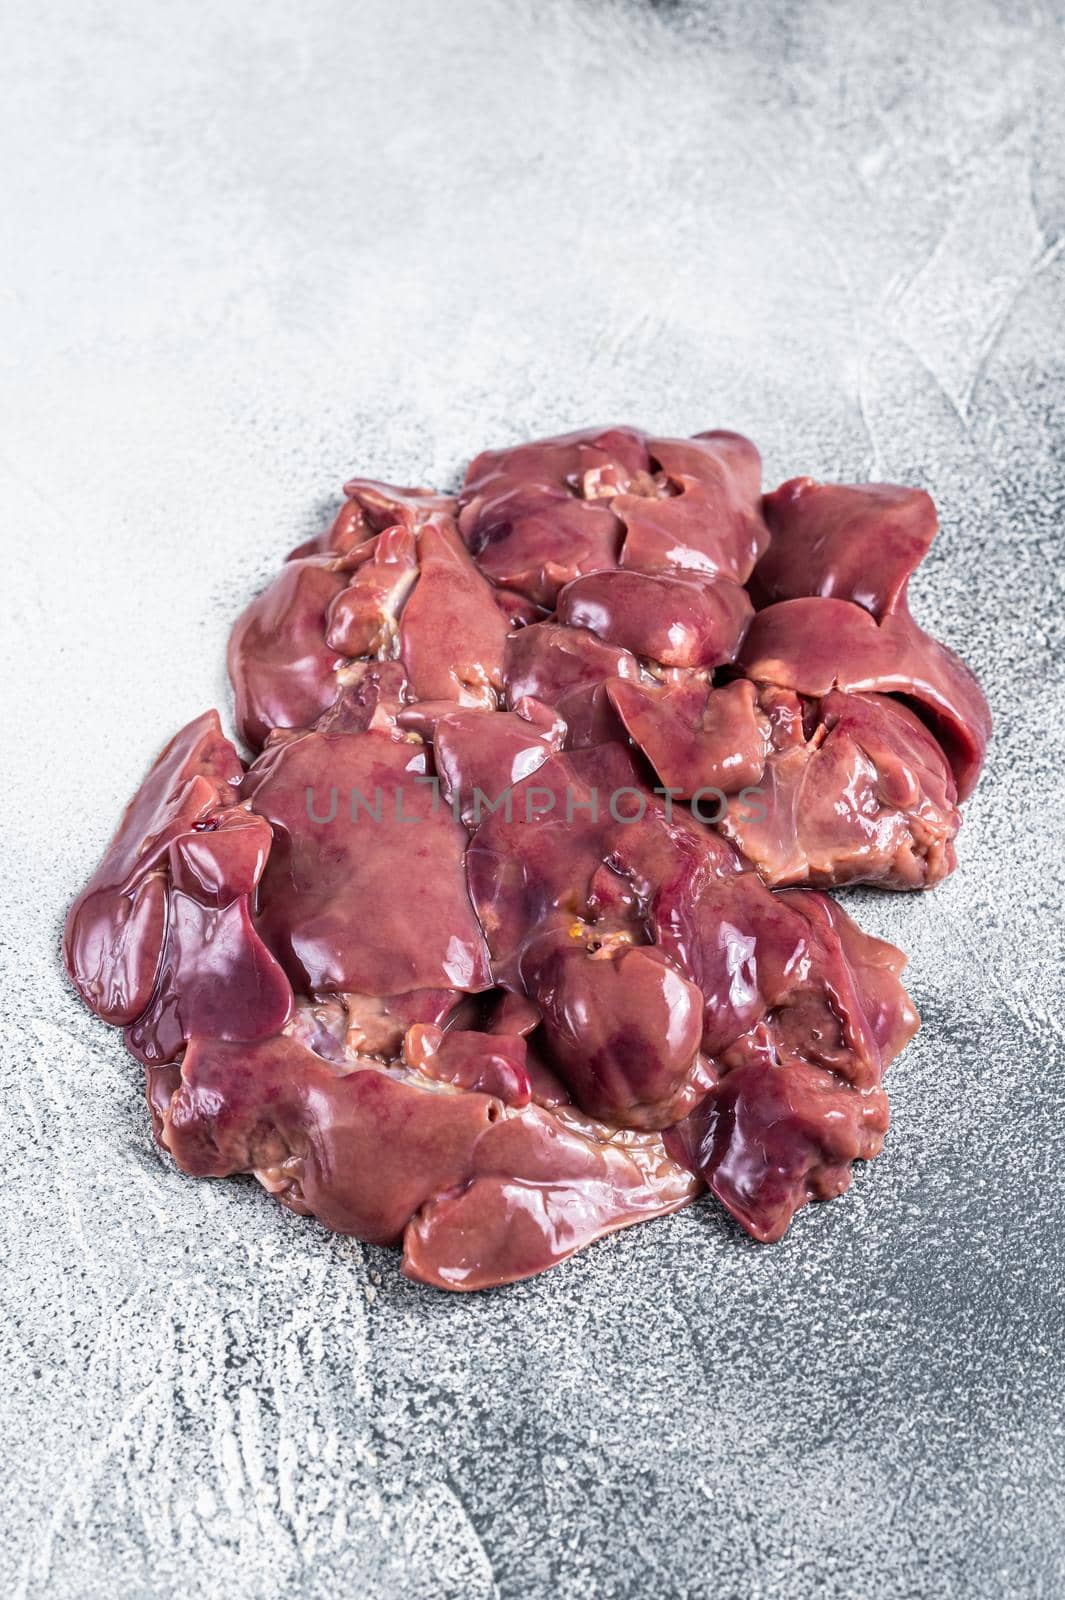 Raw chicken liver meat on butcher table. White background. Top view.